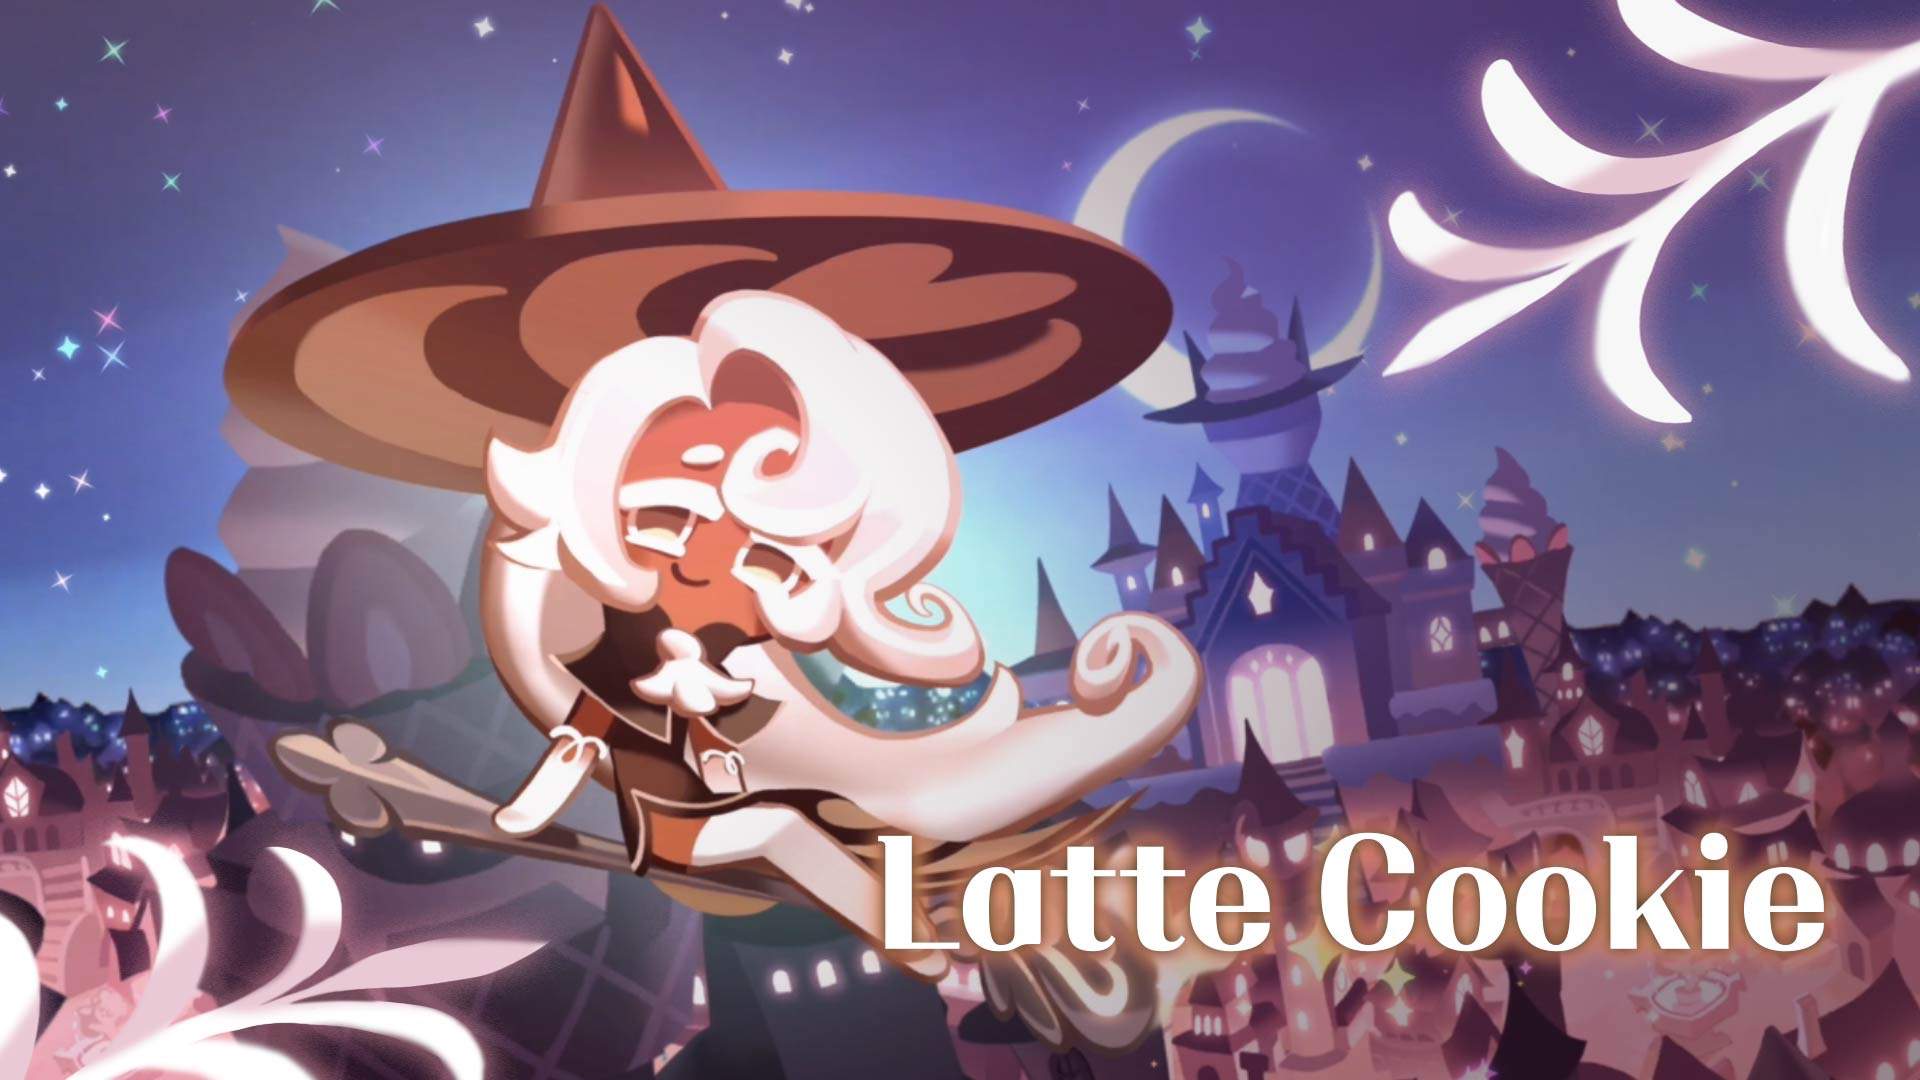 I really want to do a ship rp with Latte cookie! 